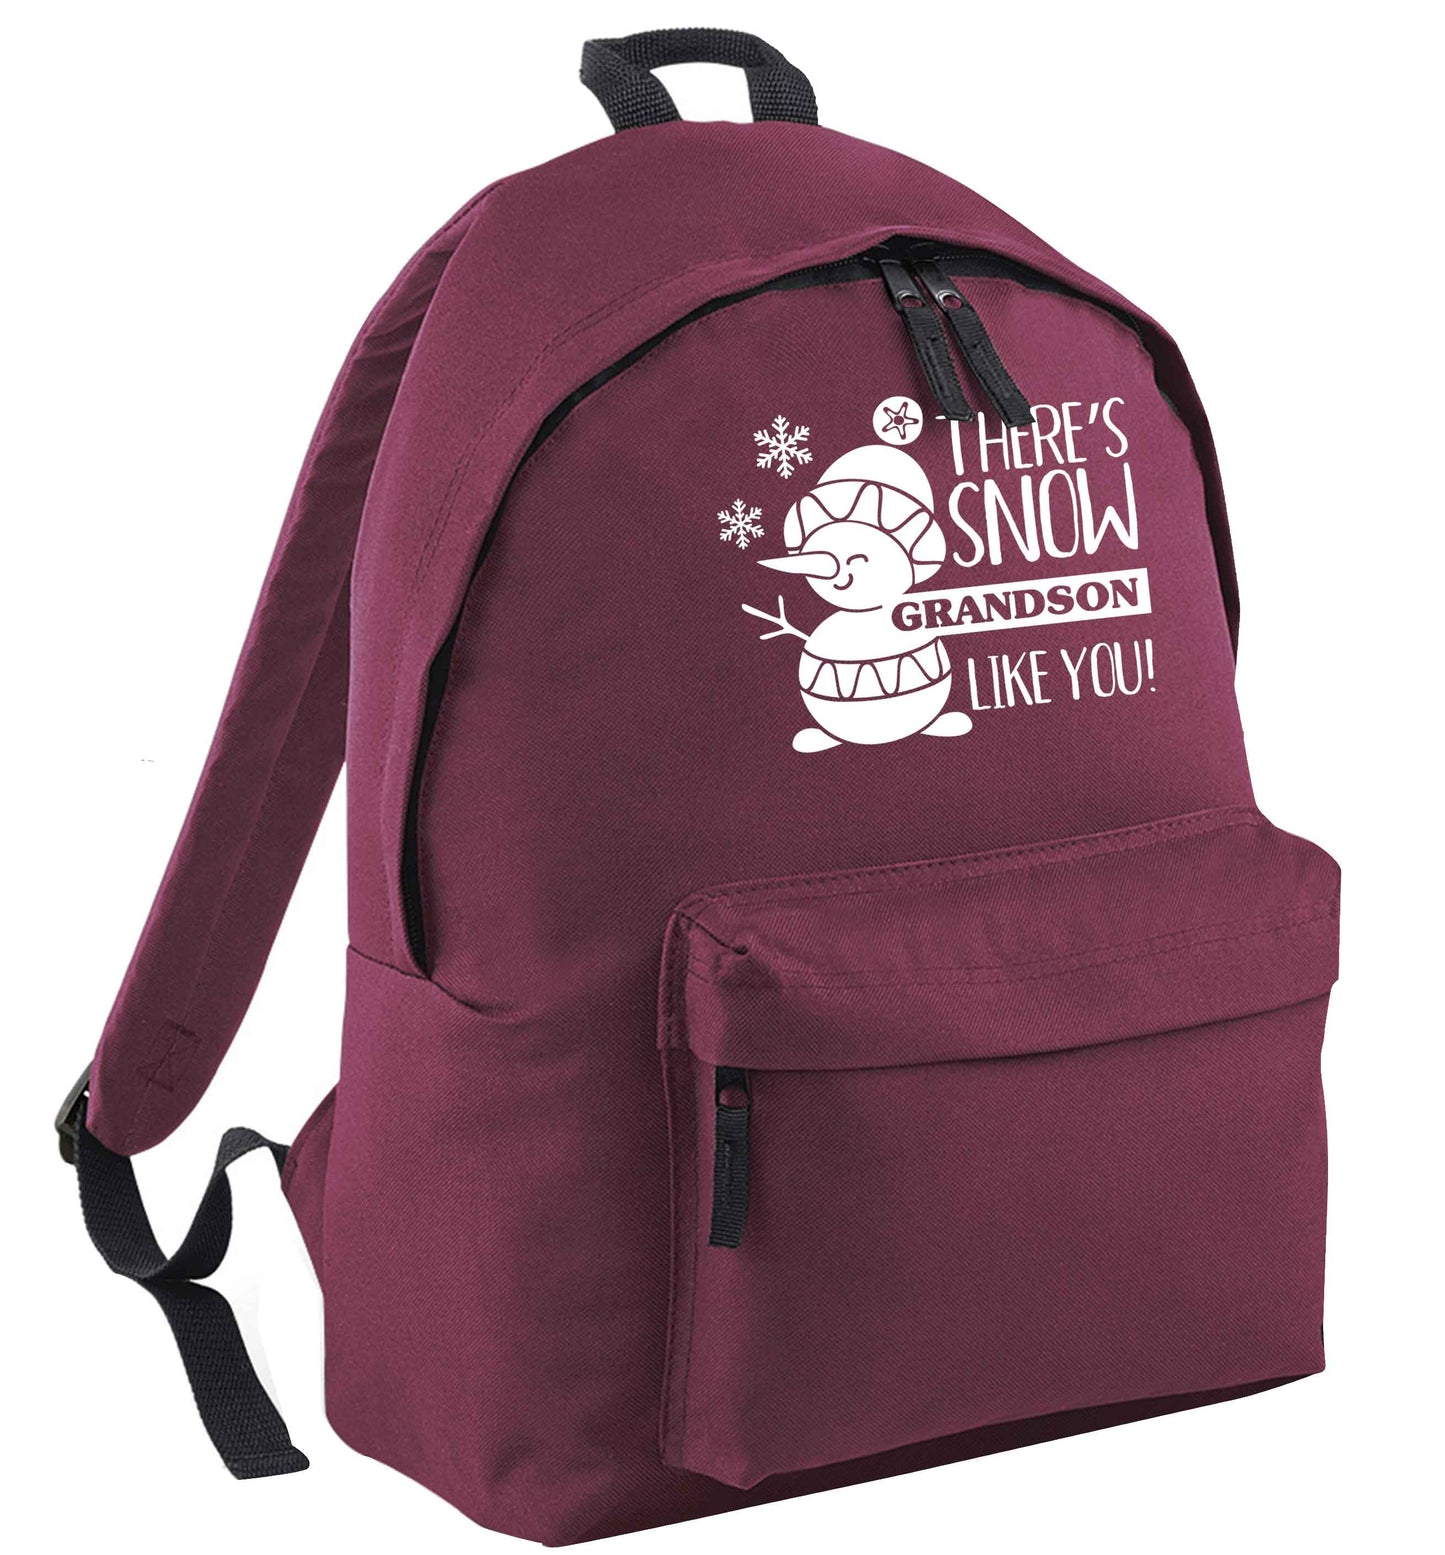 There's snow grandson like you maroon adults backpack